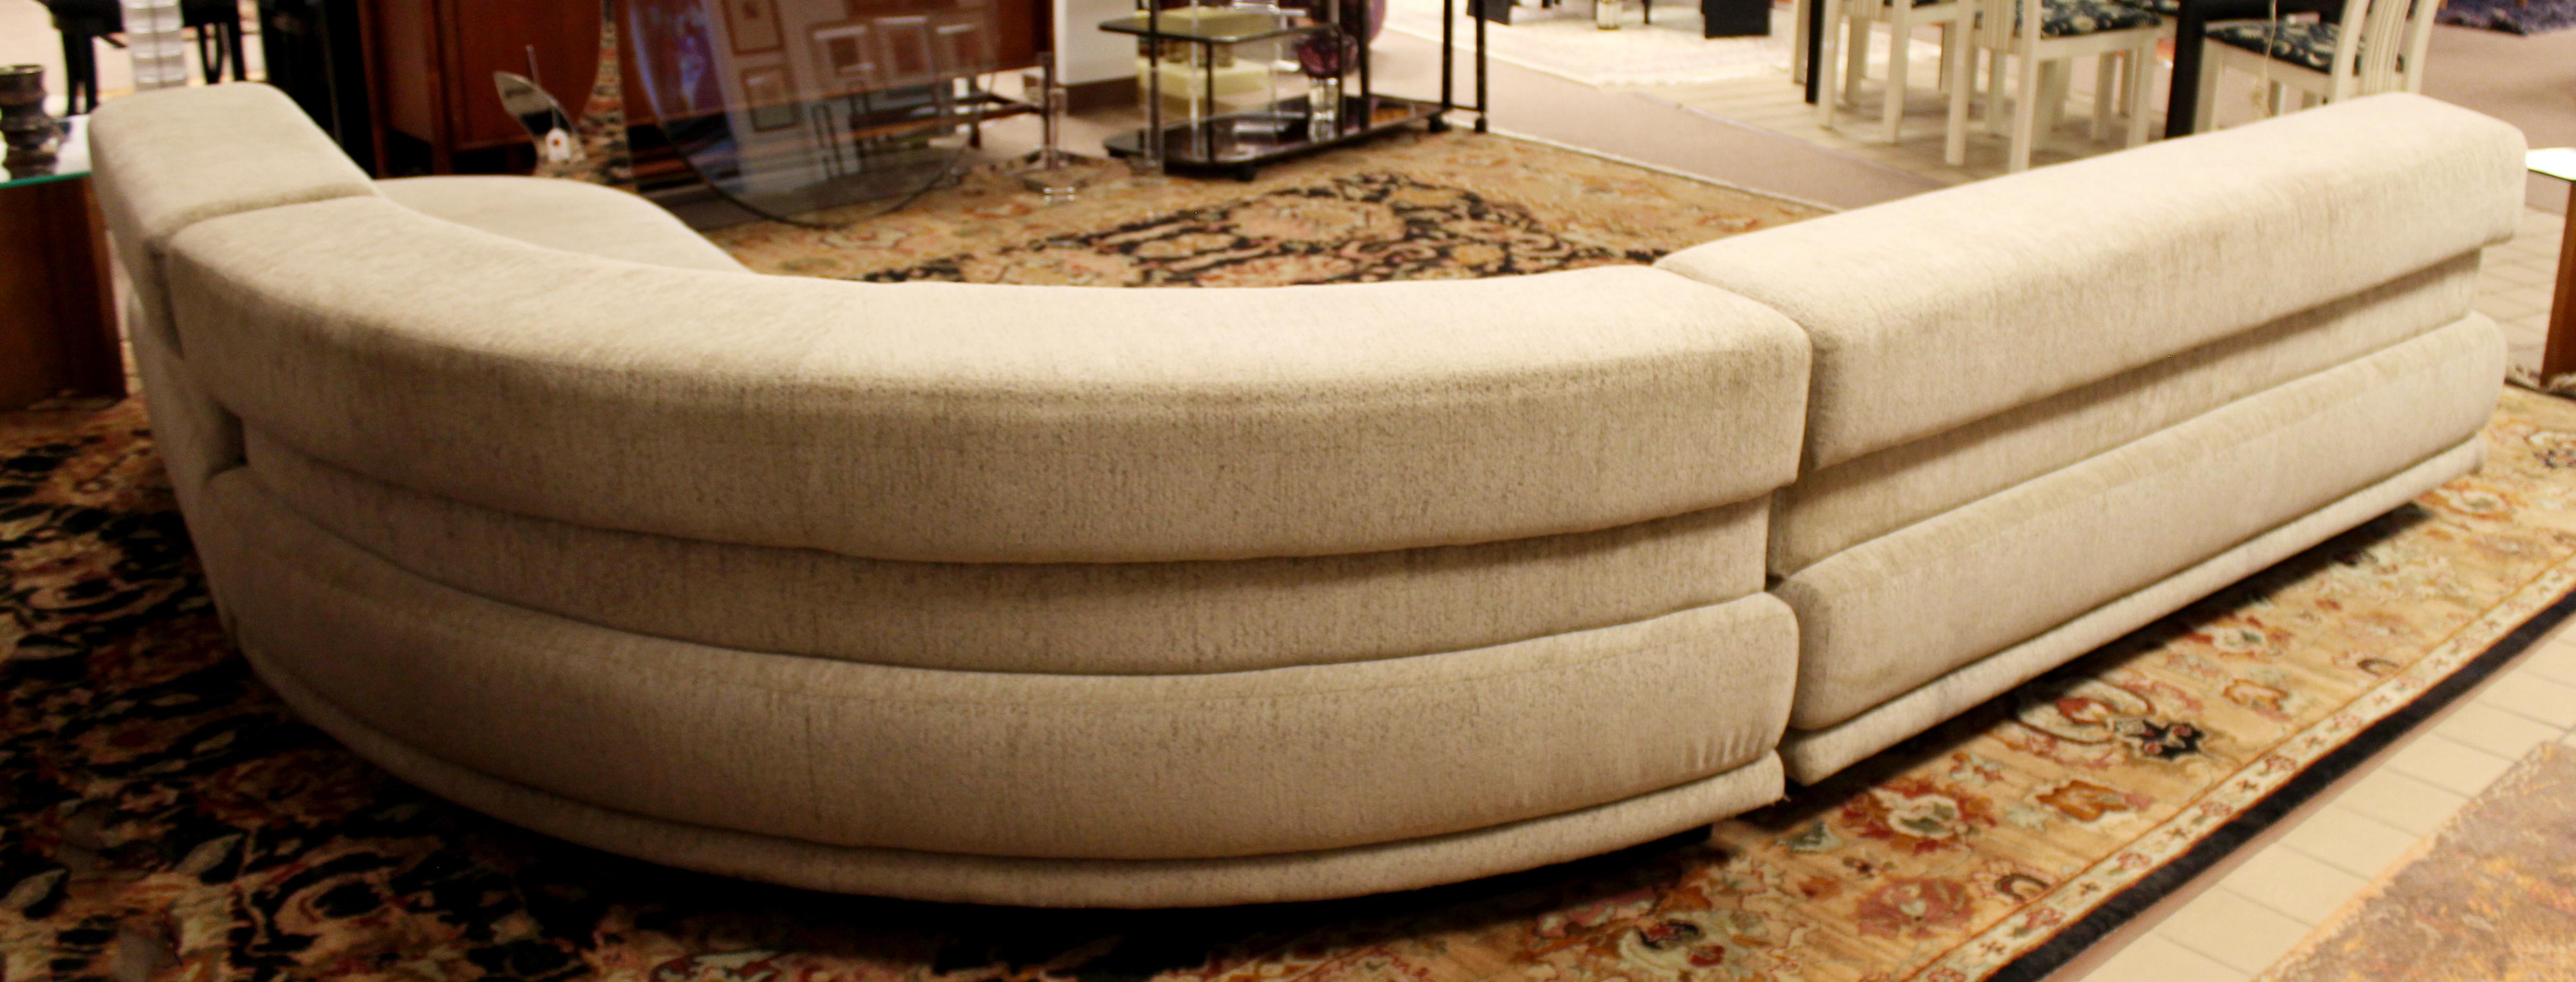 Fabric Contemporary Modernist Sculptural Serpentine Sofa Sectional Kagan Style, 1980s